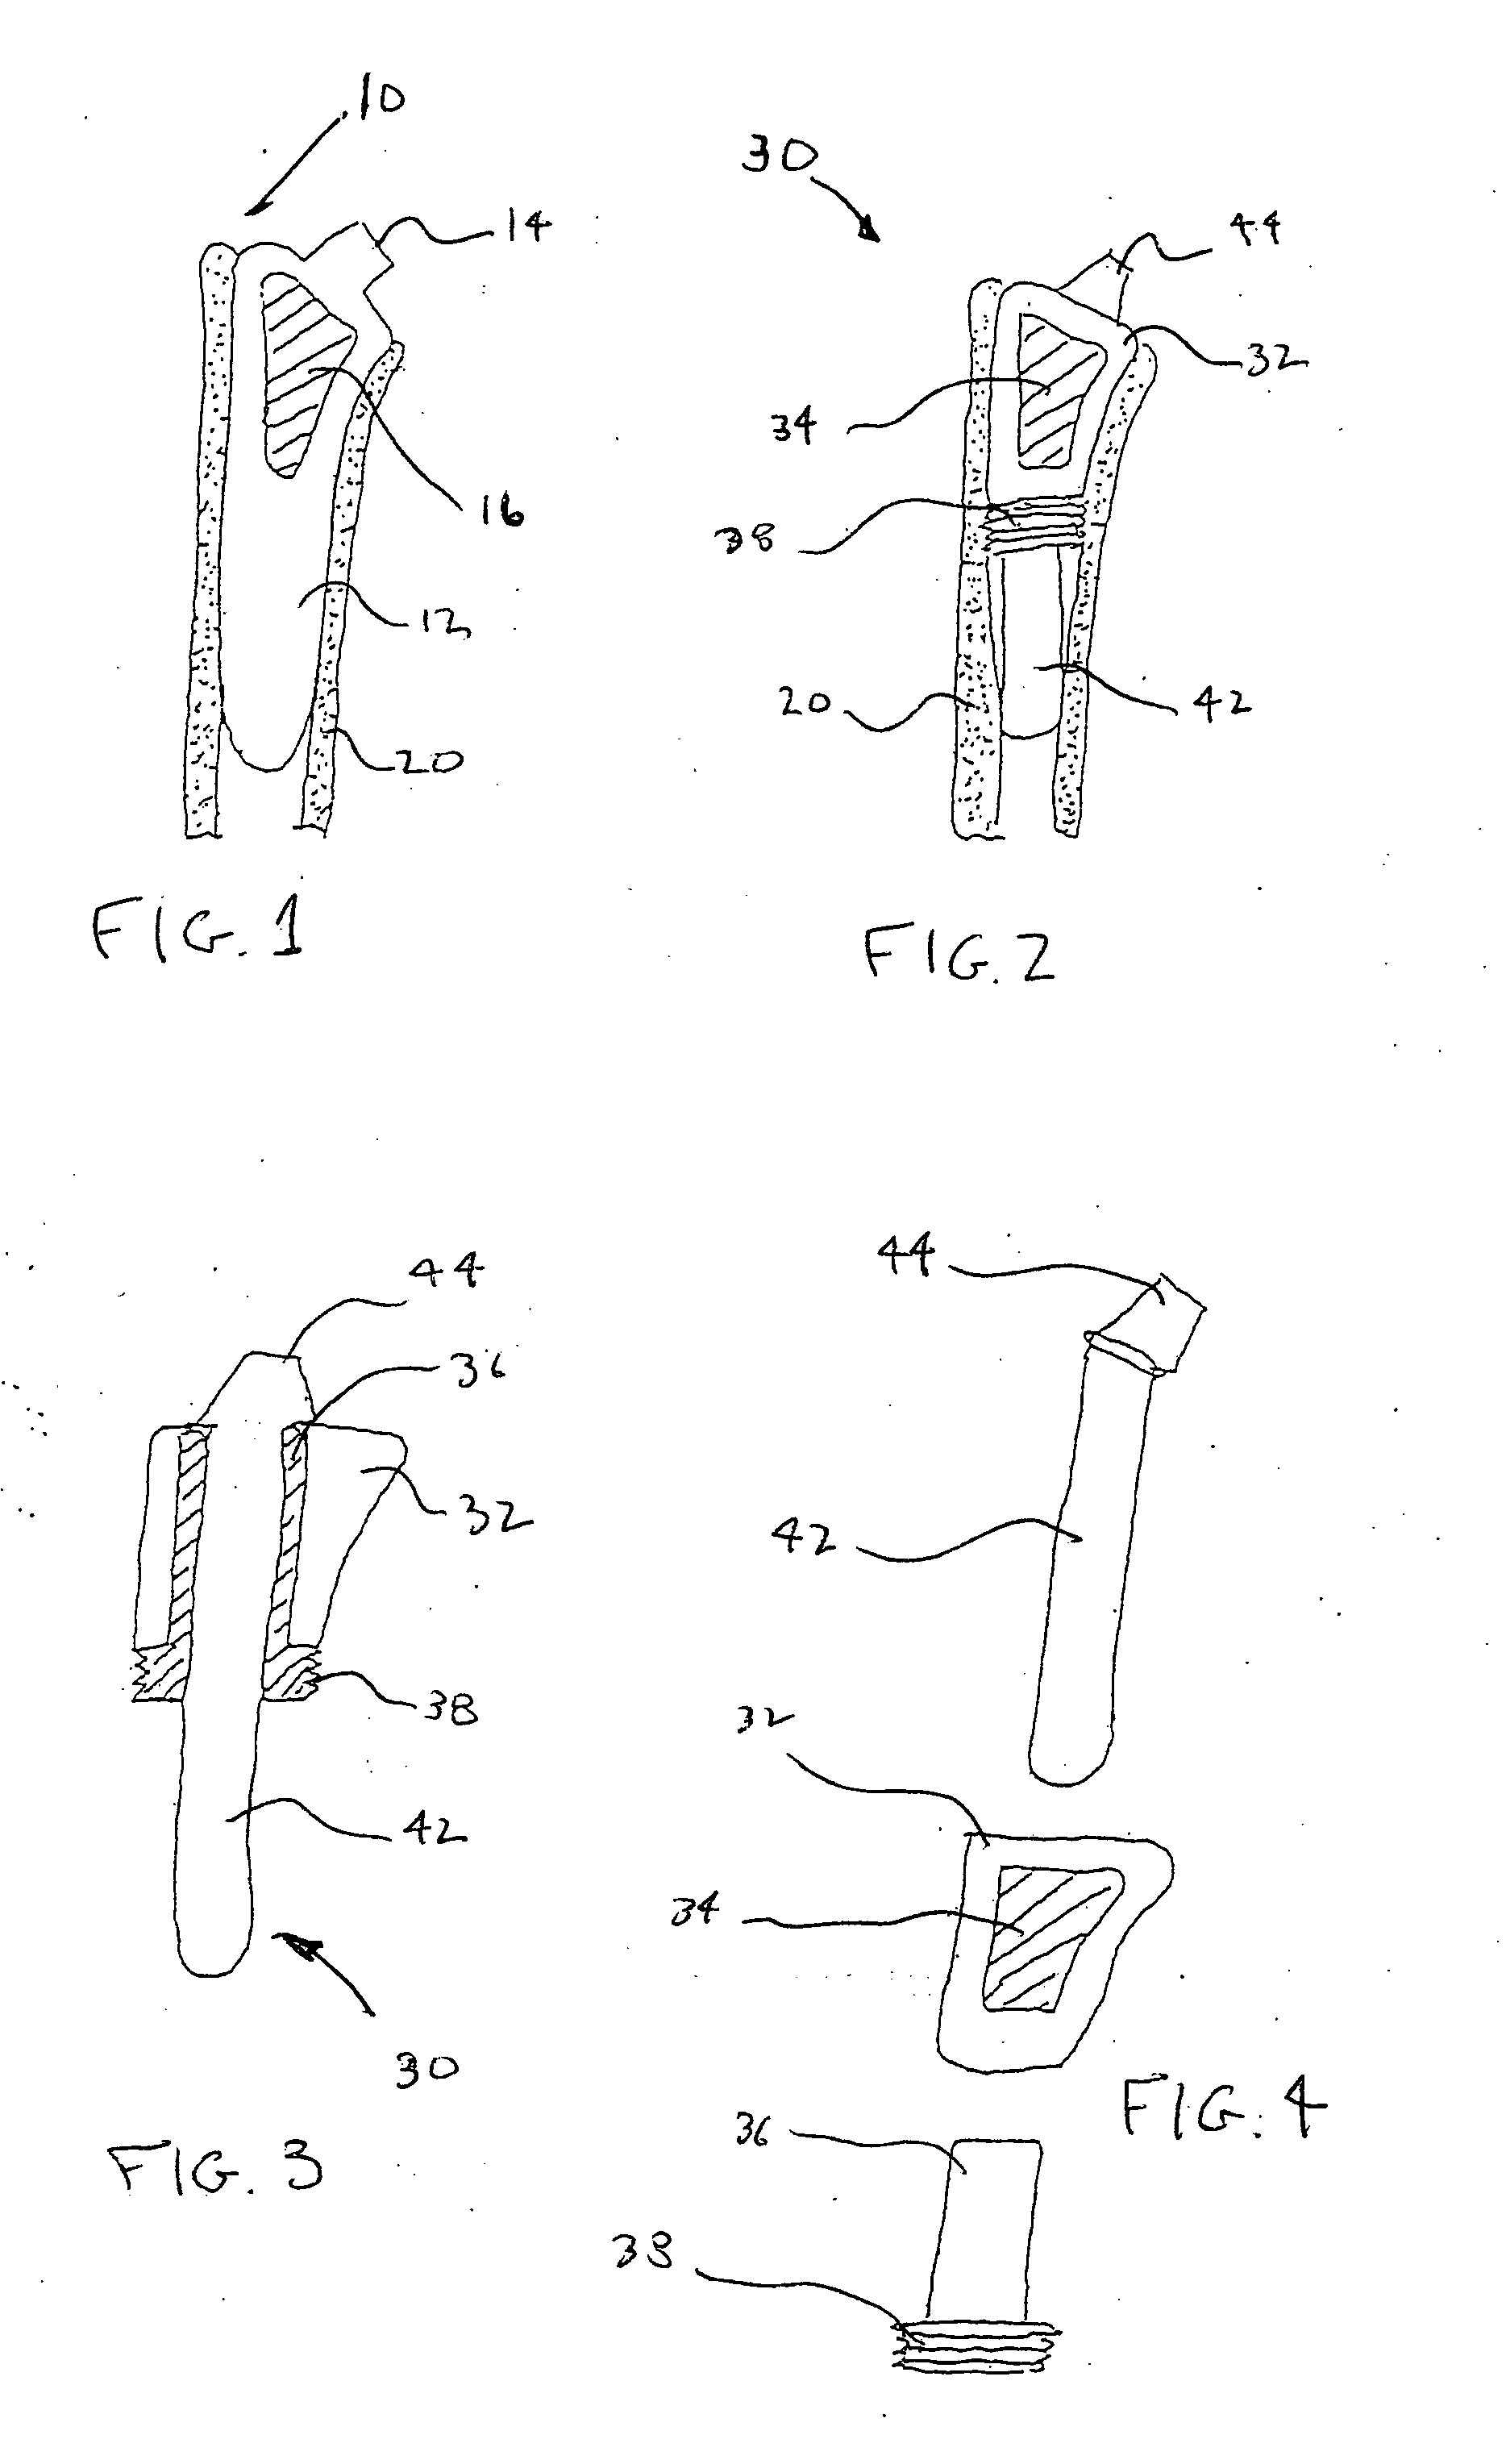 Arthroplasty devices configured to reduce shear stress